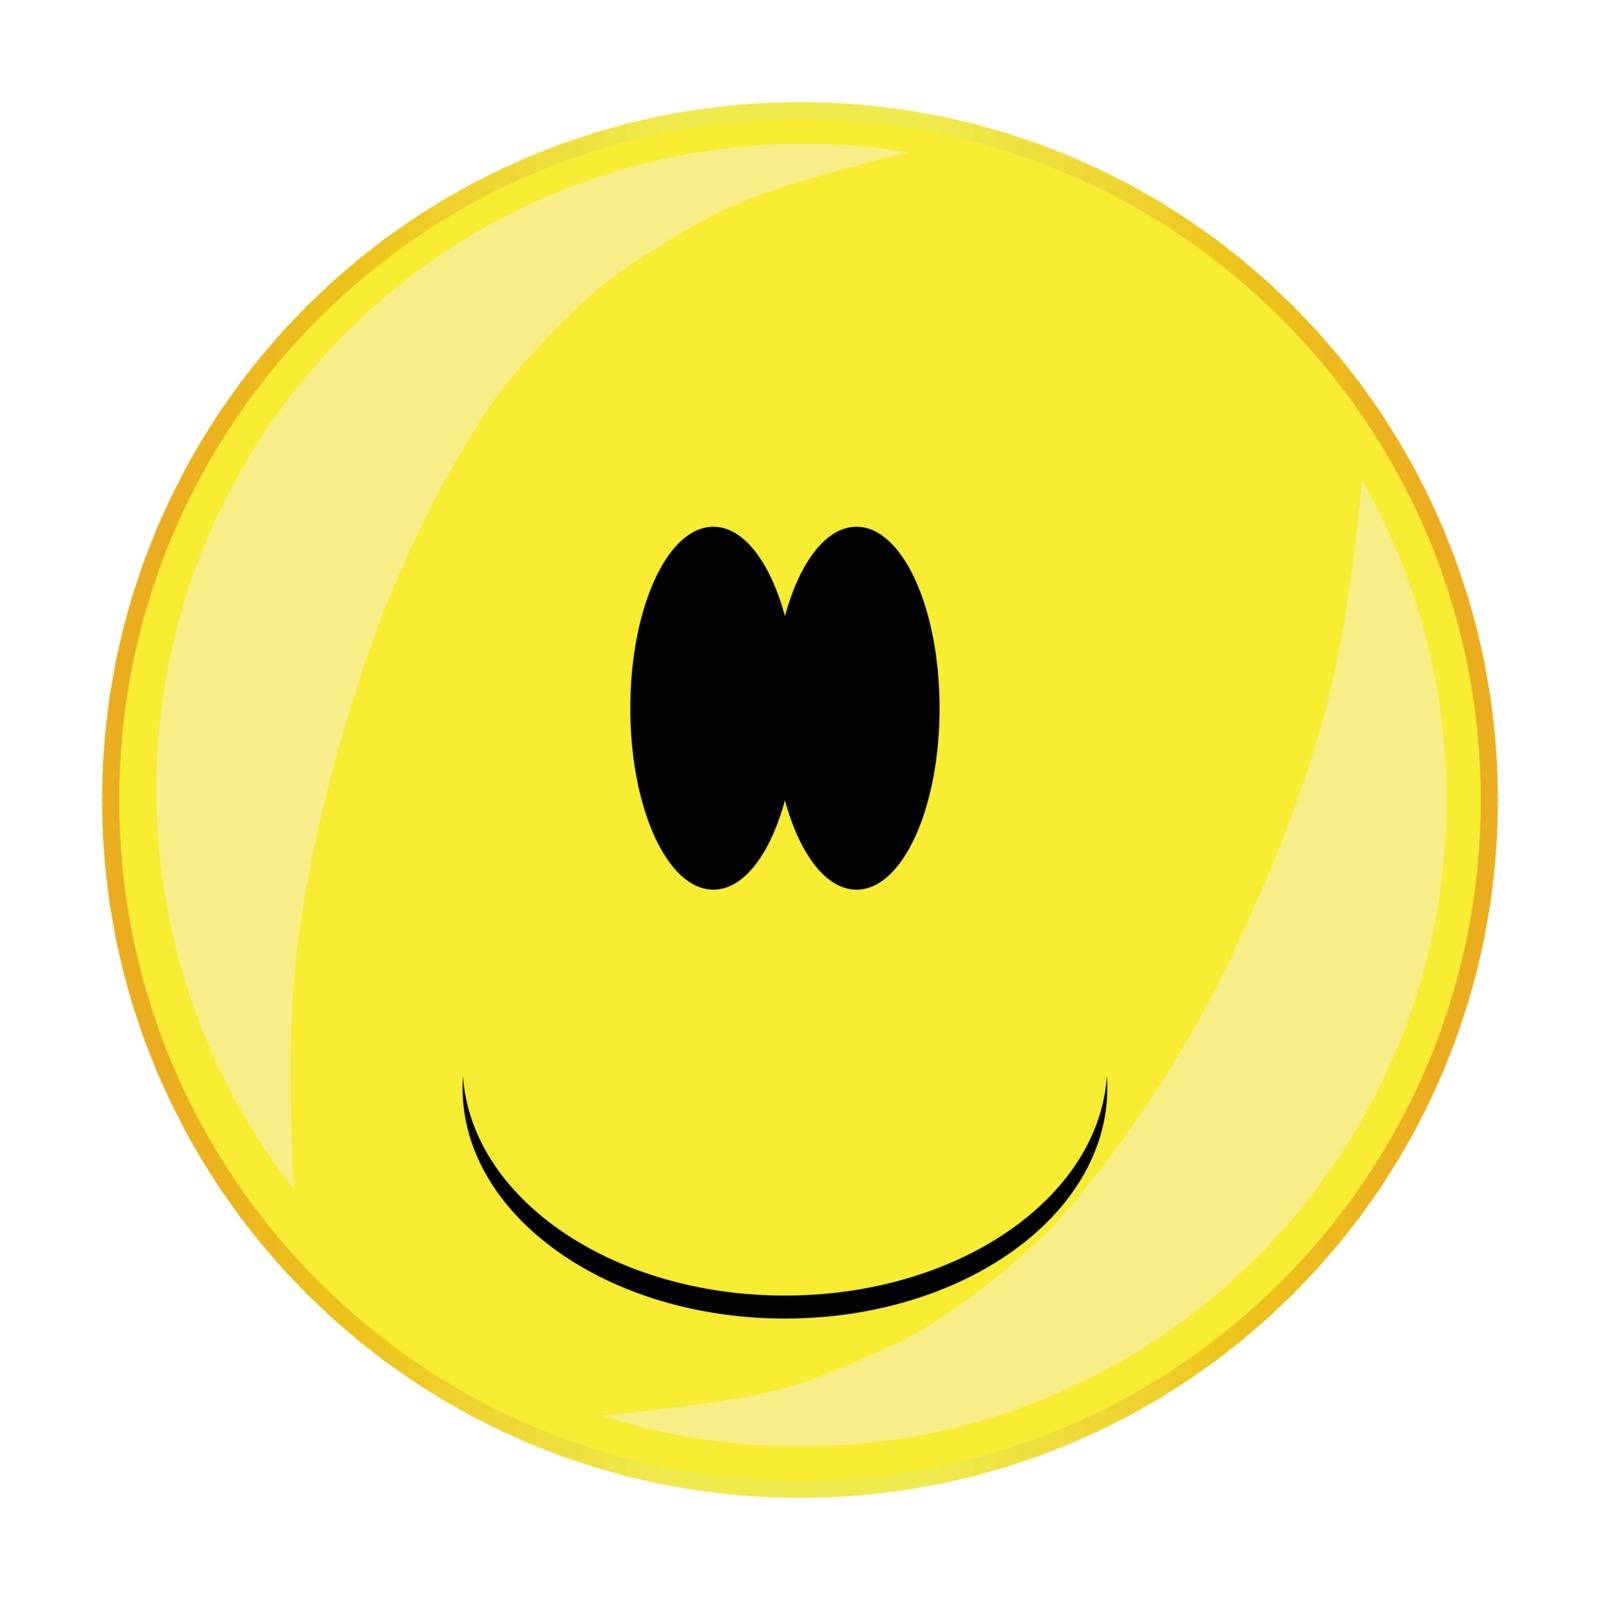 A silly stupid happy smile face button isolated on a white background